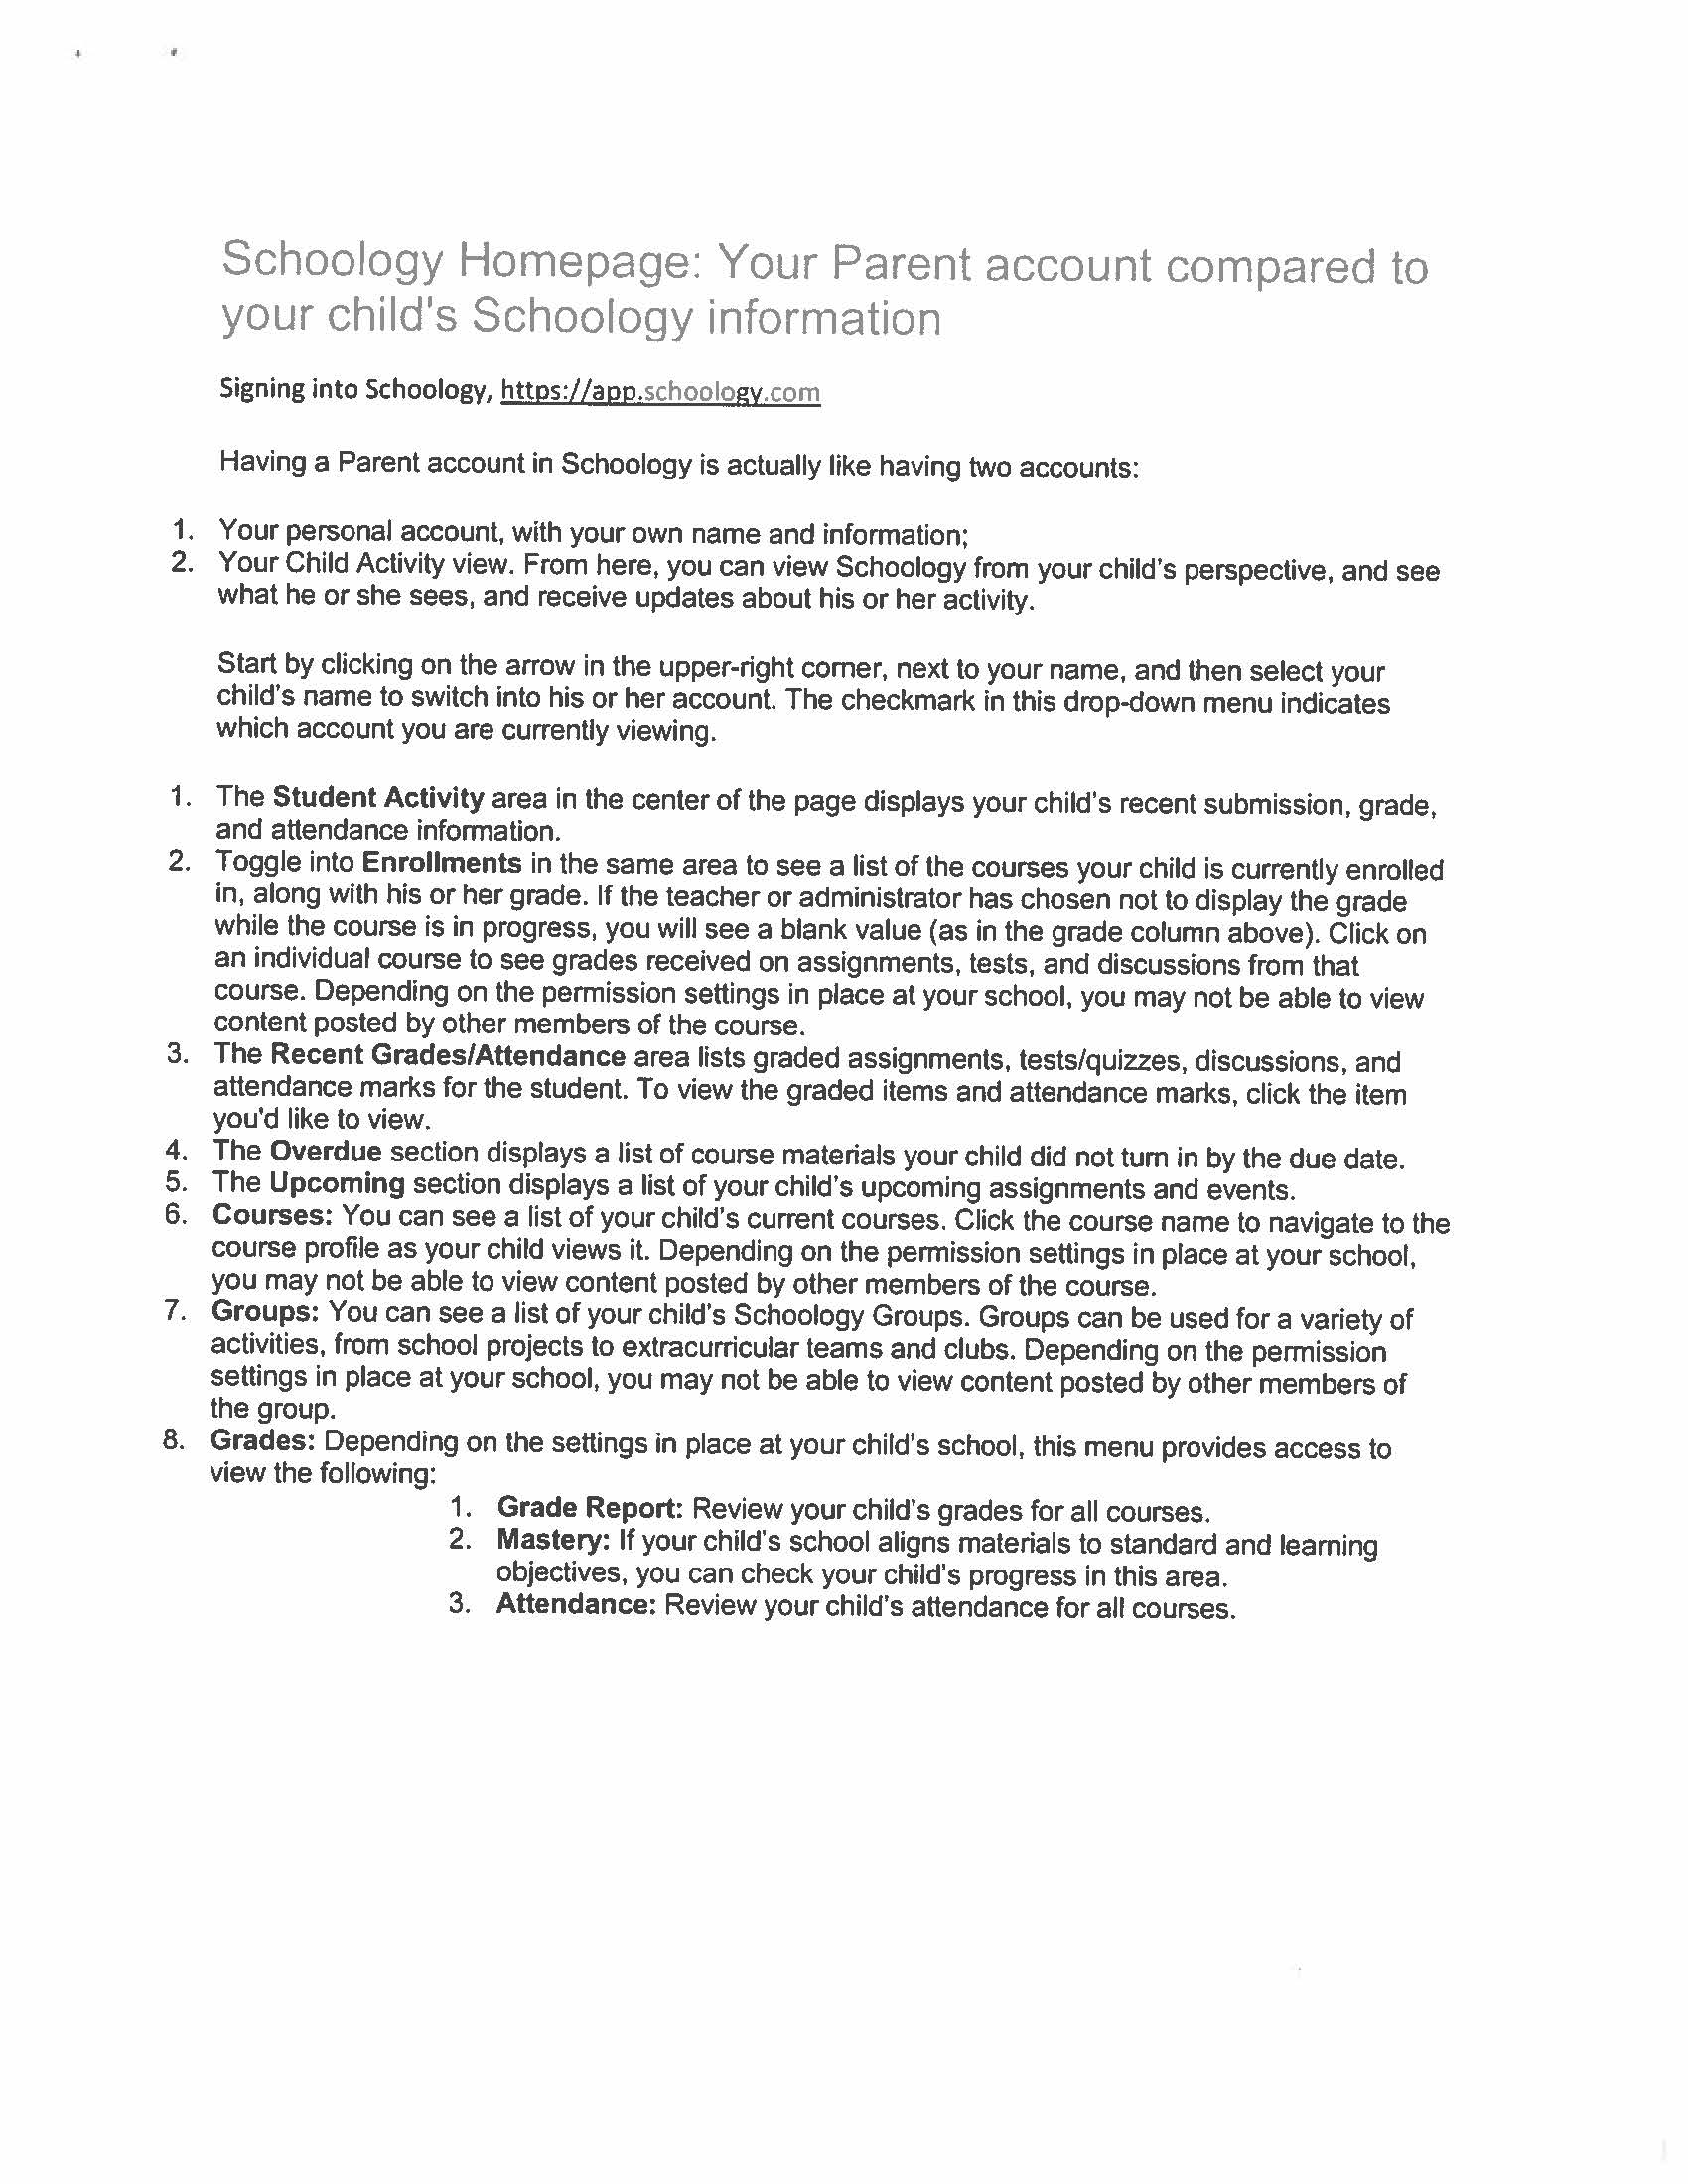 Instructions page 1